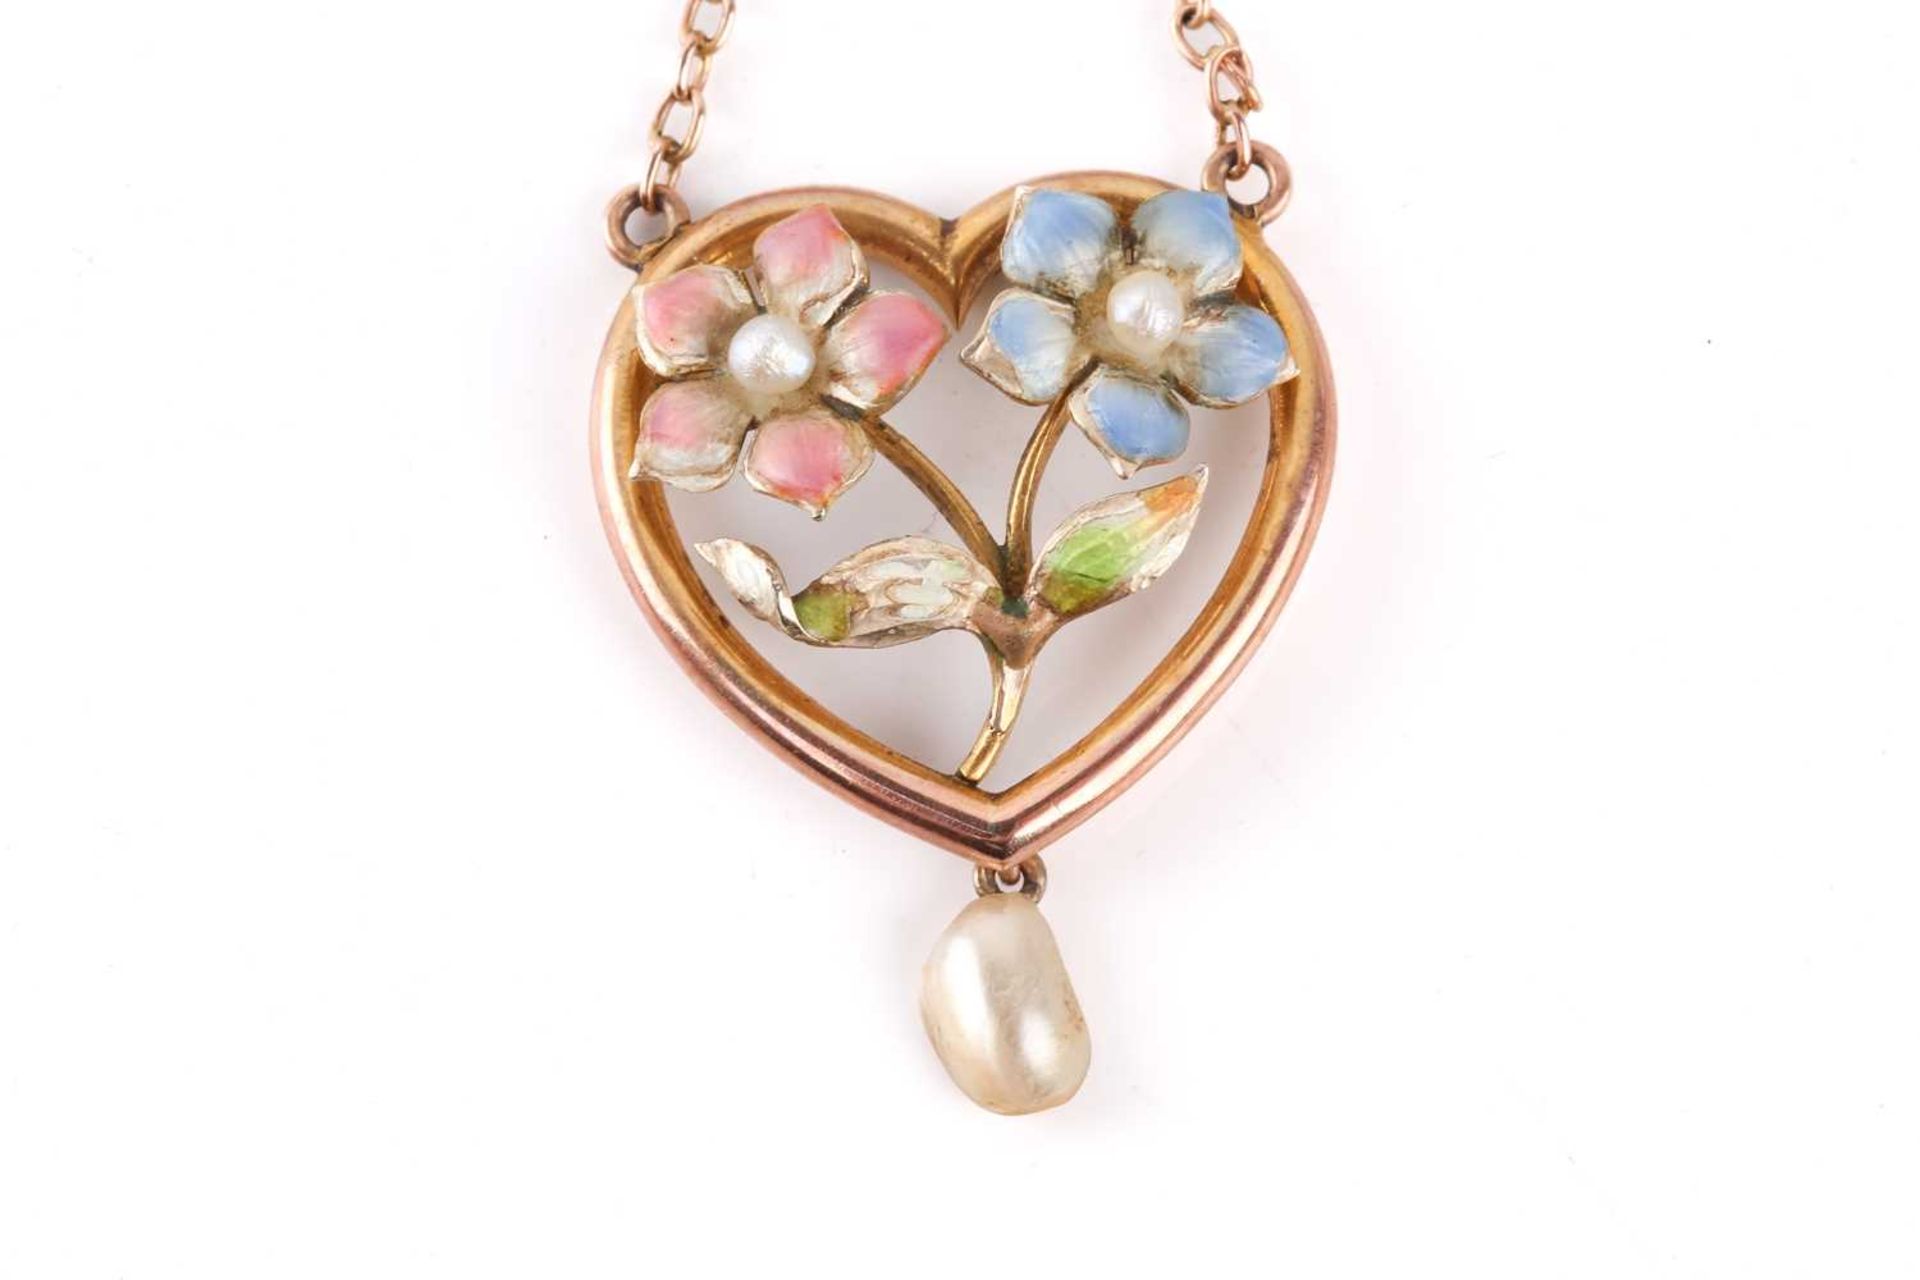 An Edwardian enamel and pearl floral pendant necklace designed as a heart with a spray of flowers in - Image 4 of 8